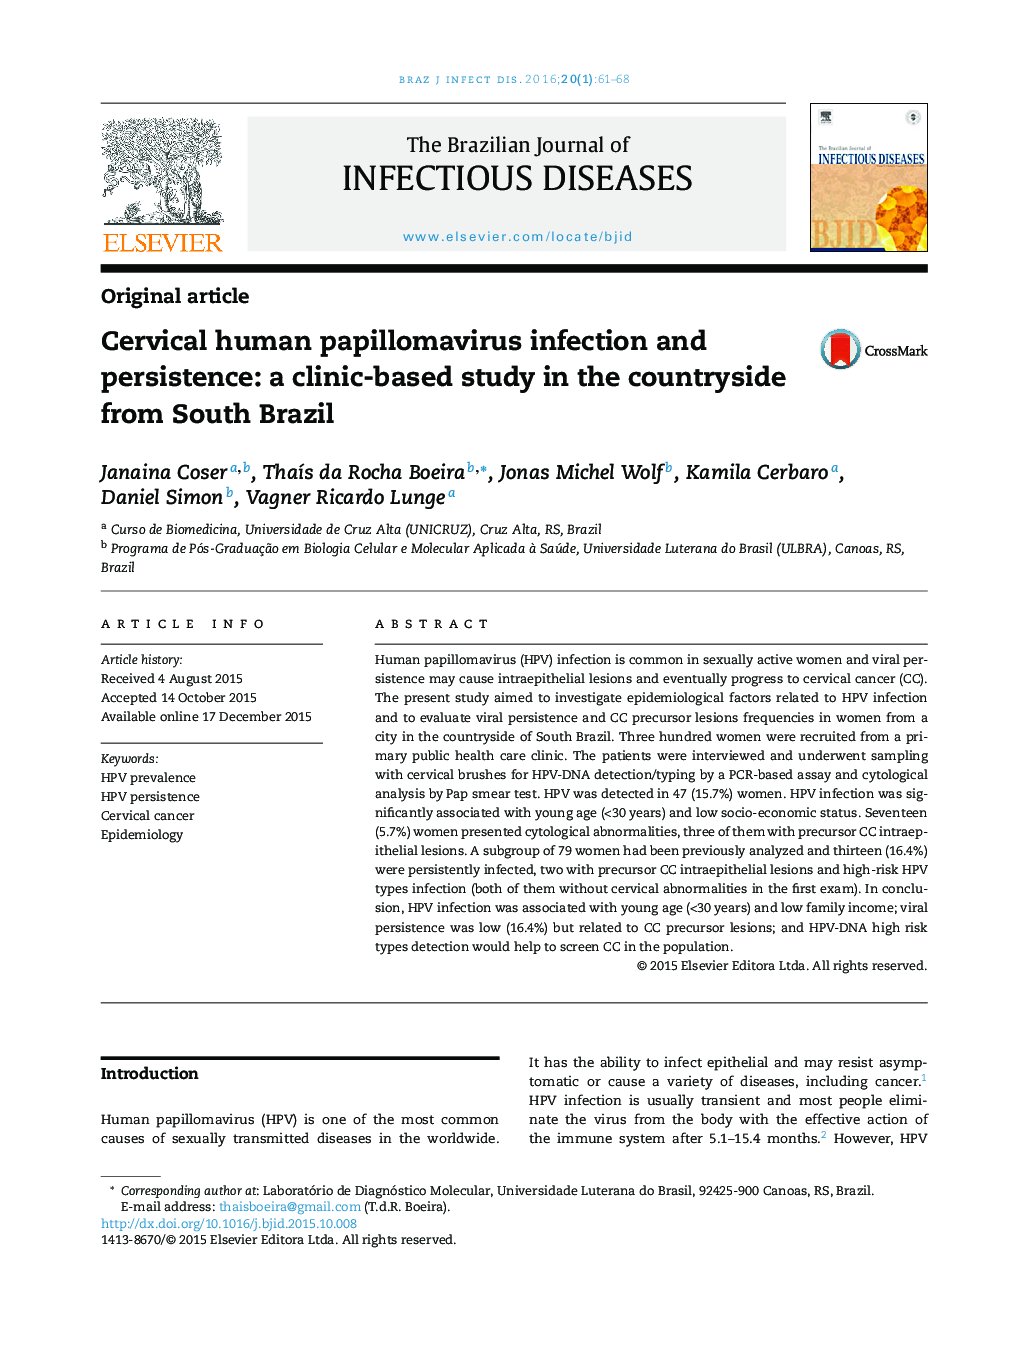 Cervical human papillomavirus infection and persistence: a clinic-based study in the countryside from South Brazil